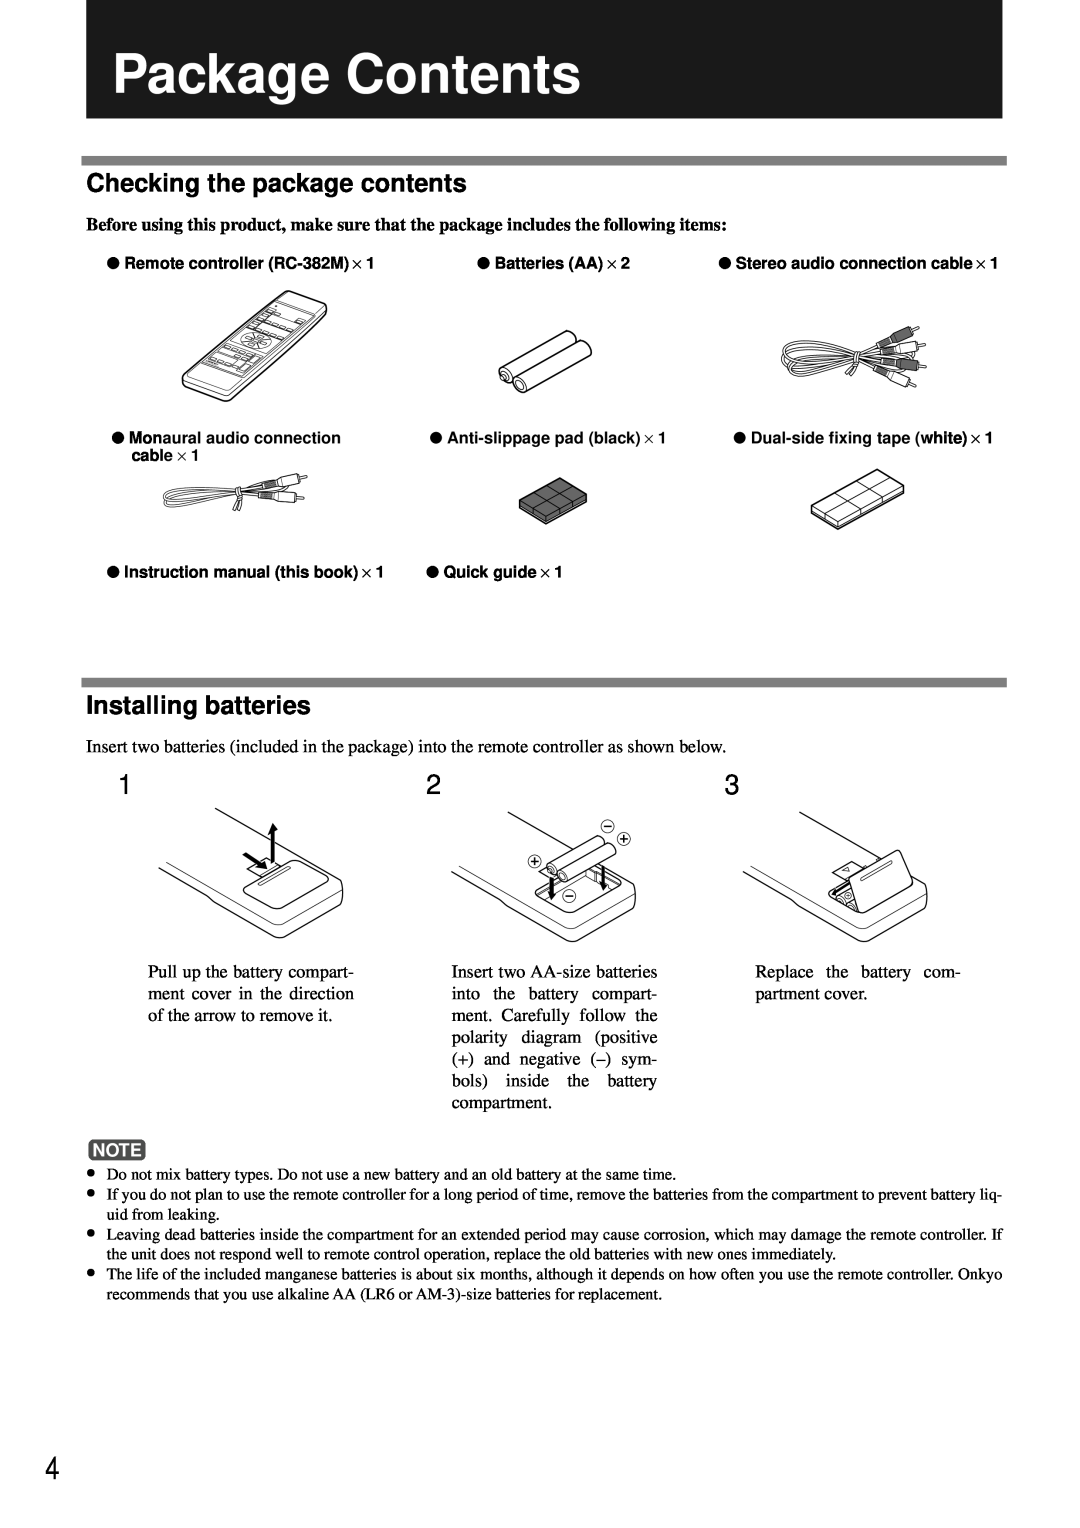 Onkyo PHC-5 instruction manual Package Contents, Checking the package contents, Installing batteries 